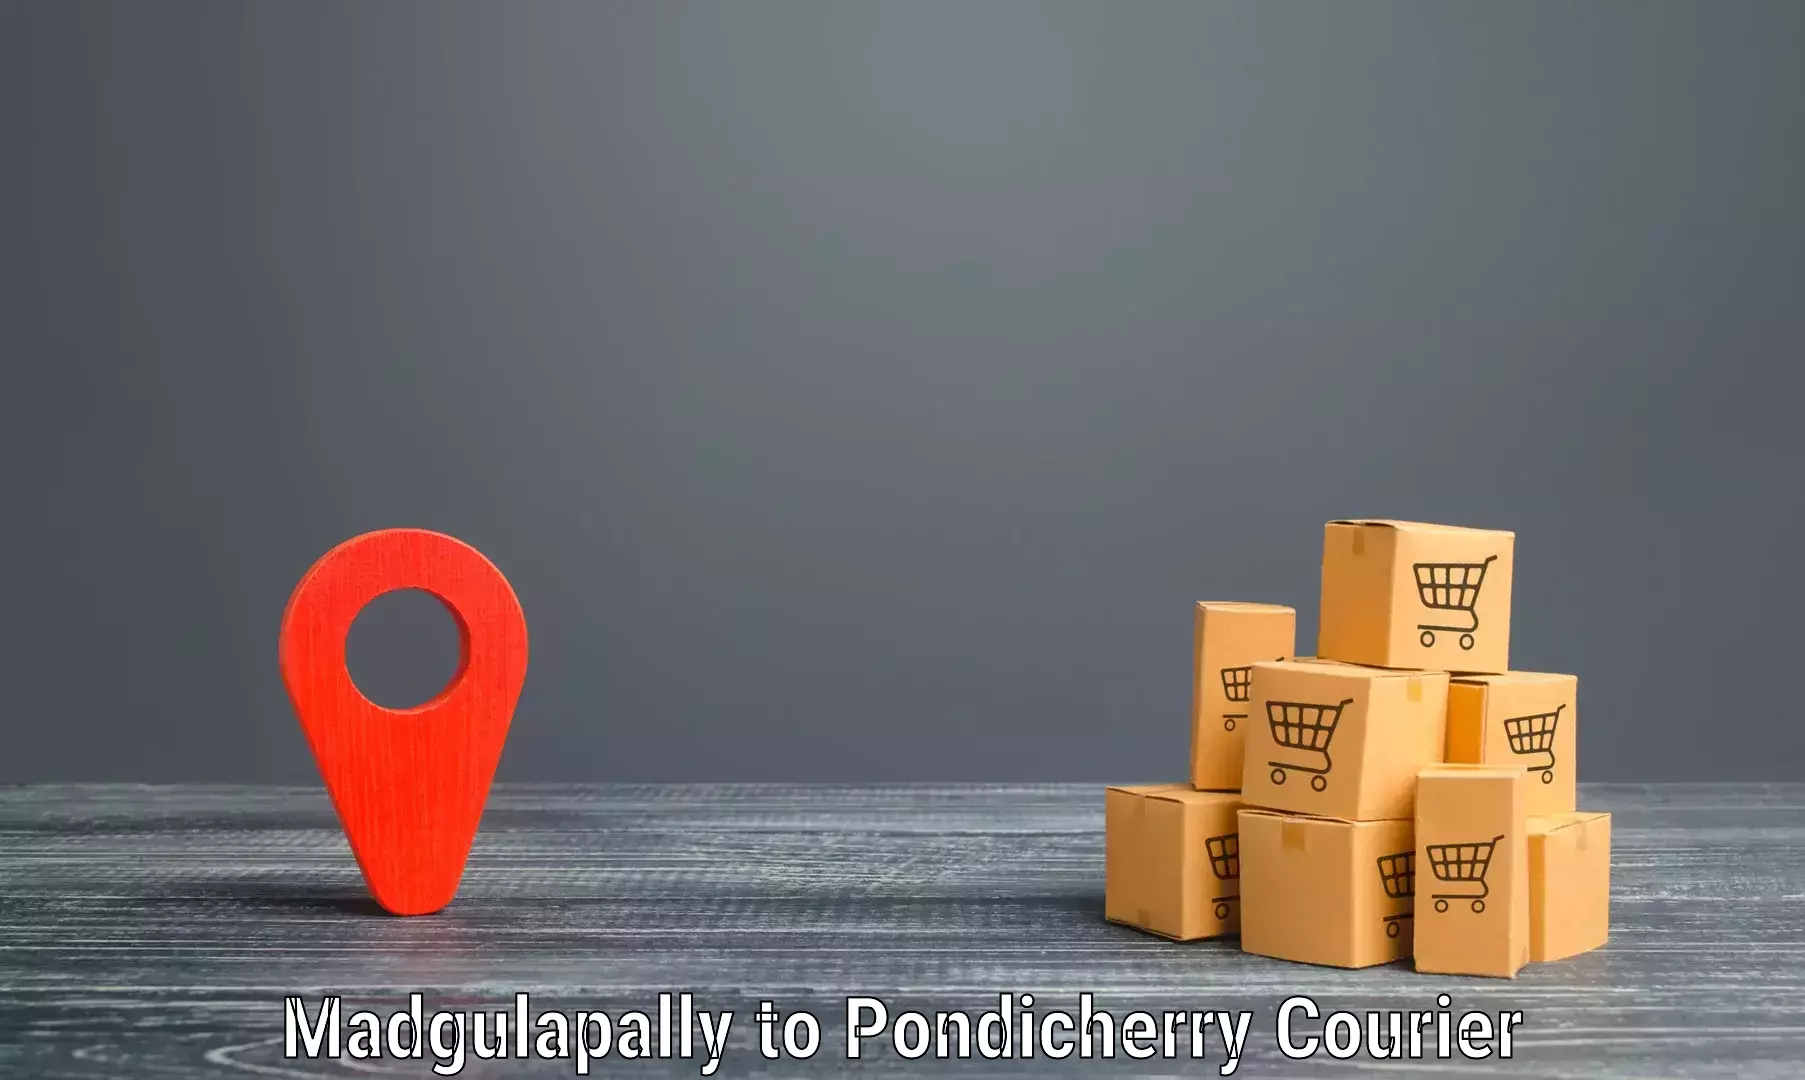 Customer-oriented courier services Madgulapally to Pondicherry University